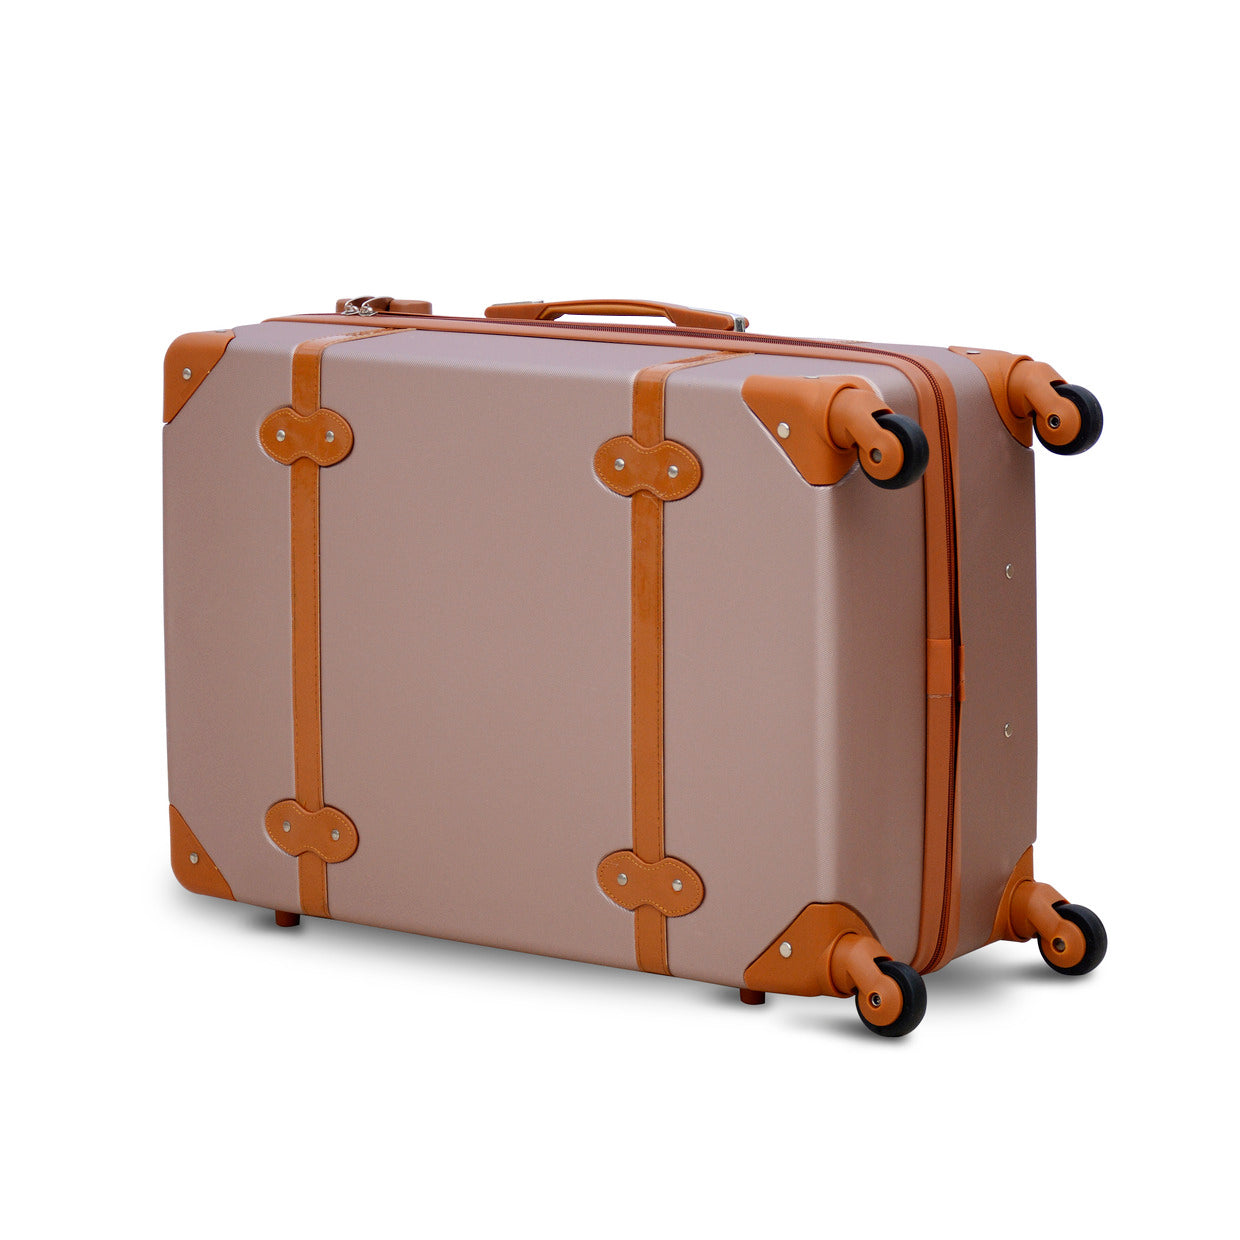 24" Corner Guard Rose Gold Lightweight ABS Luggage Bag With Spinner Wheel